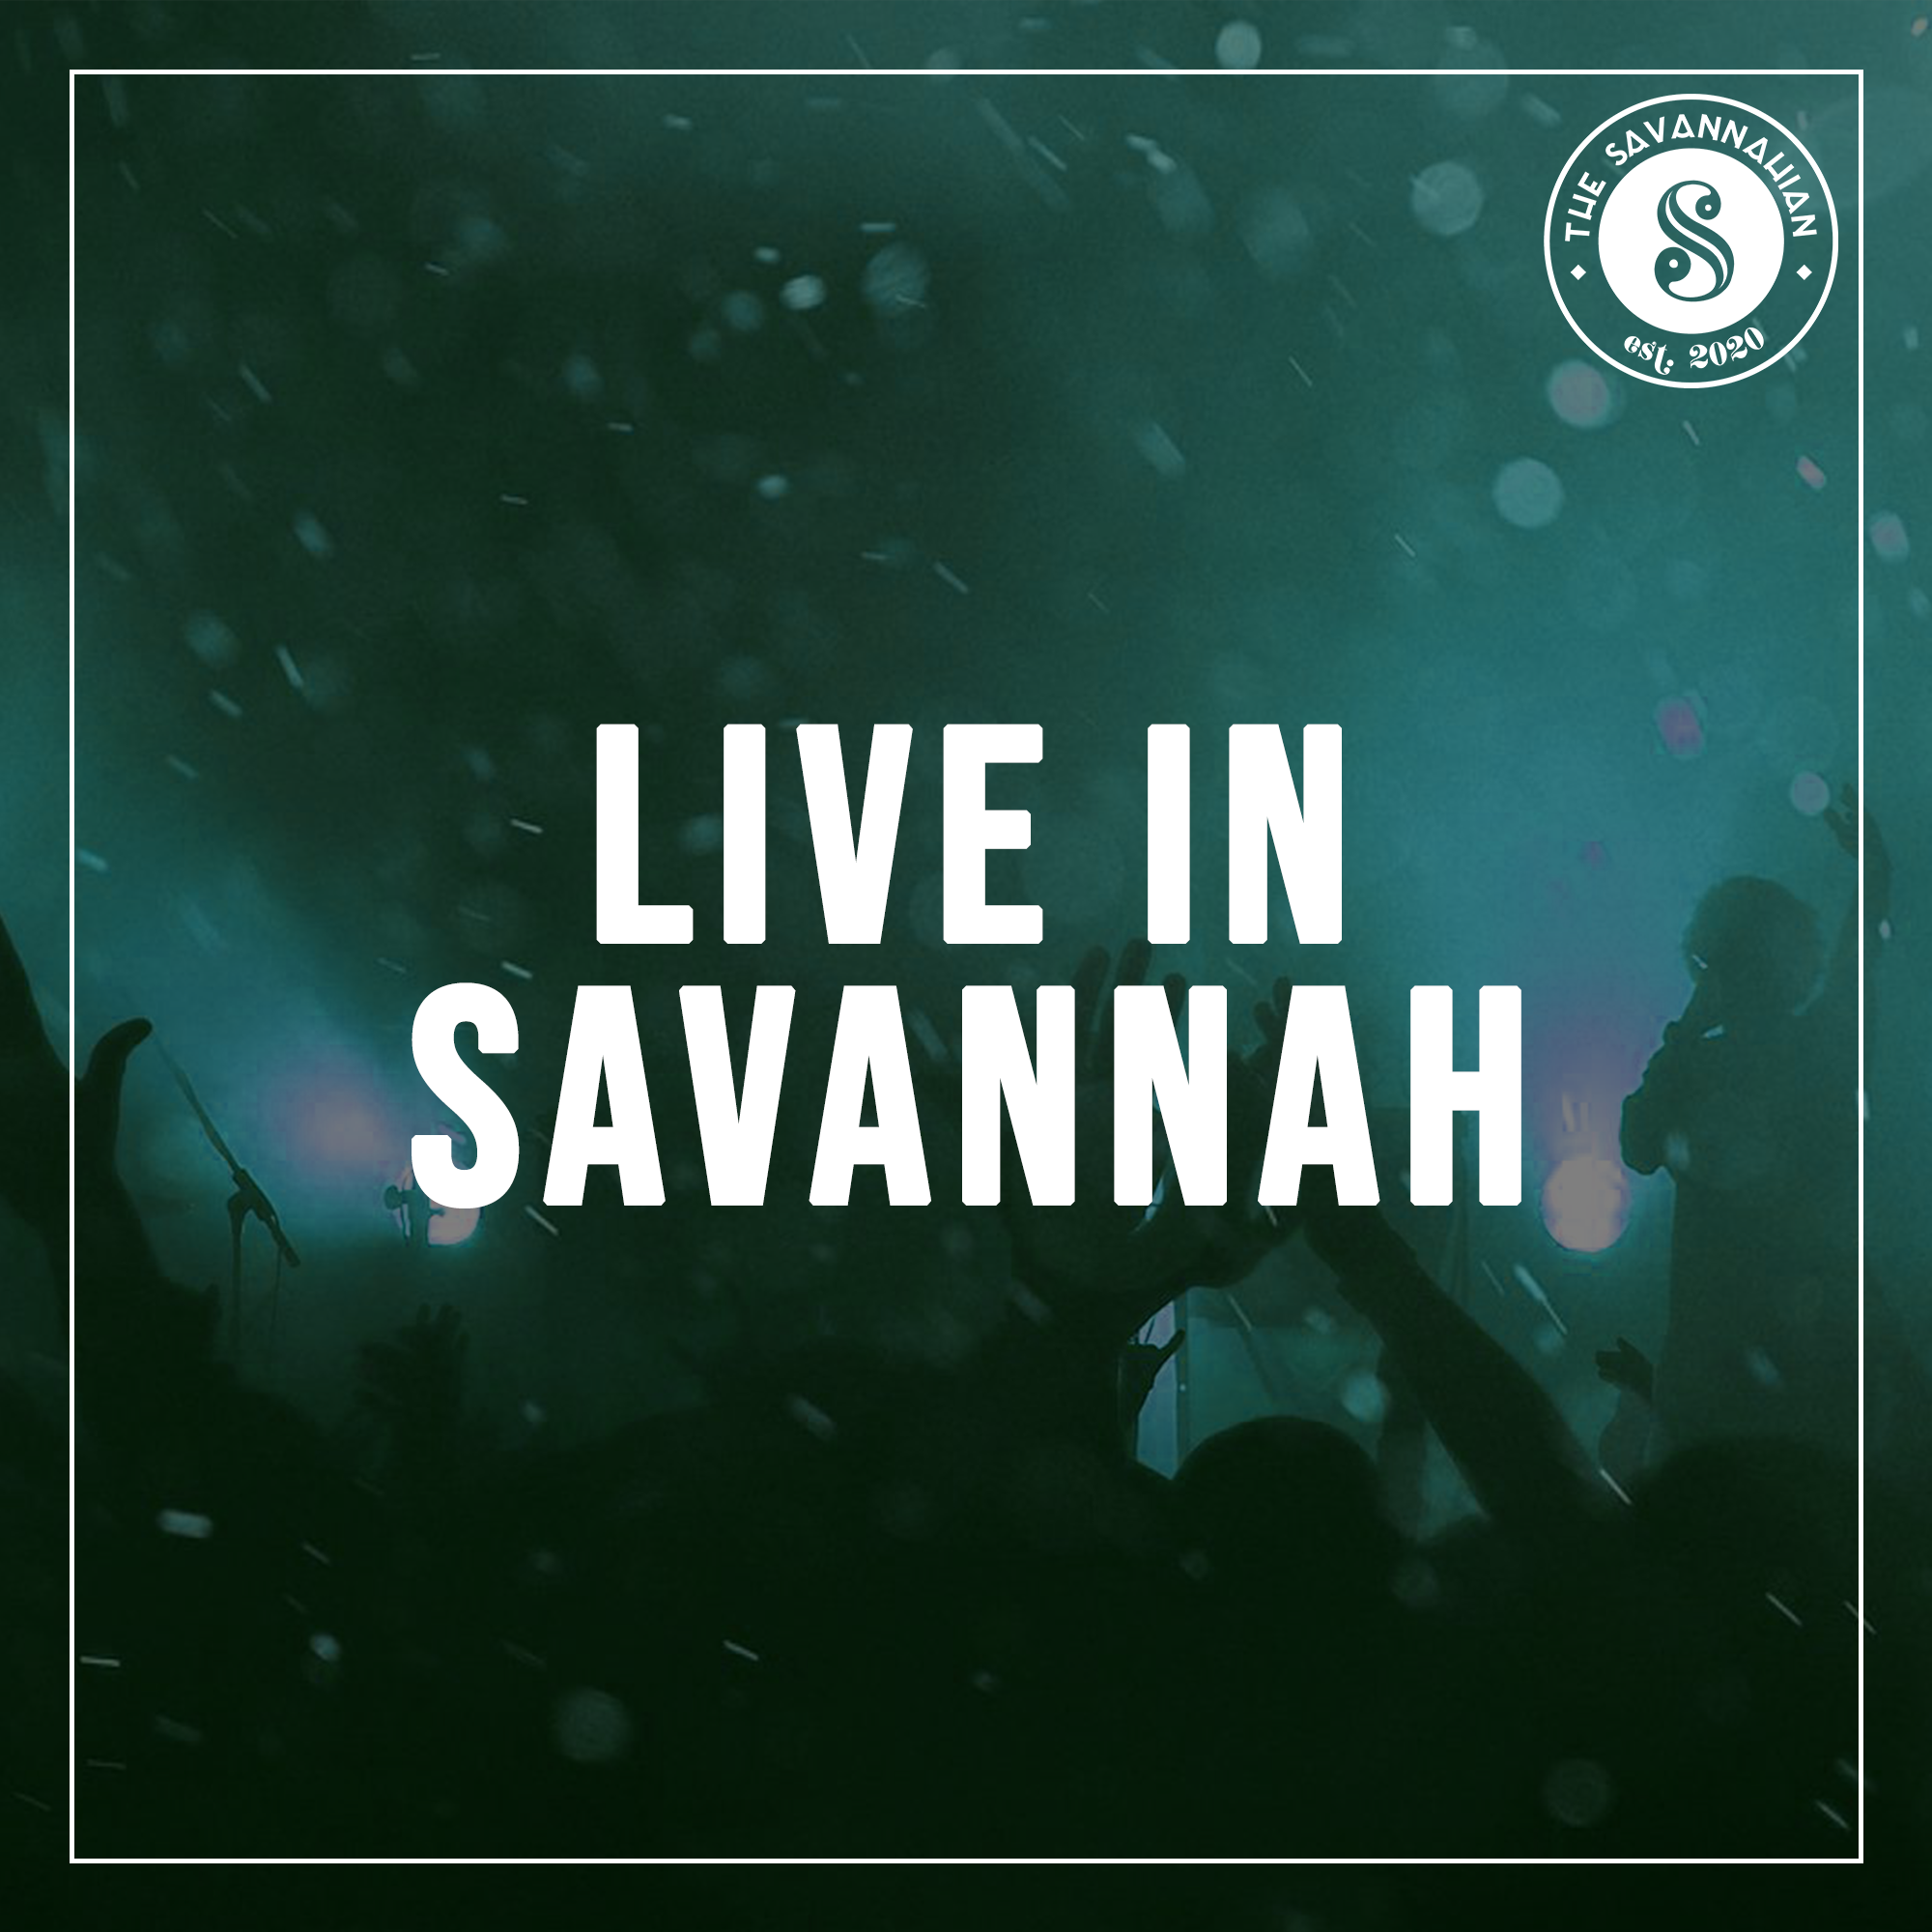 Live in Savannah: Upcoming events August 5-10